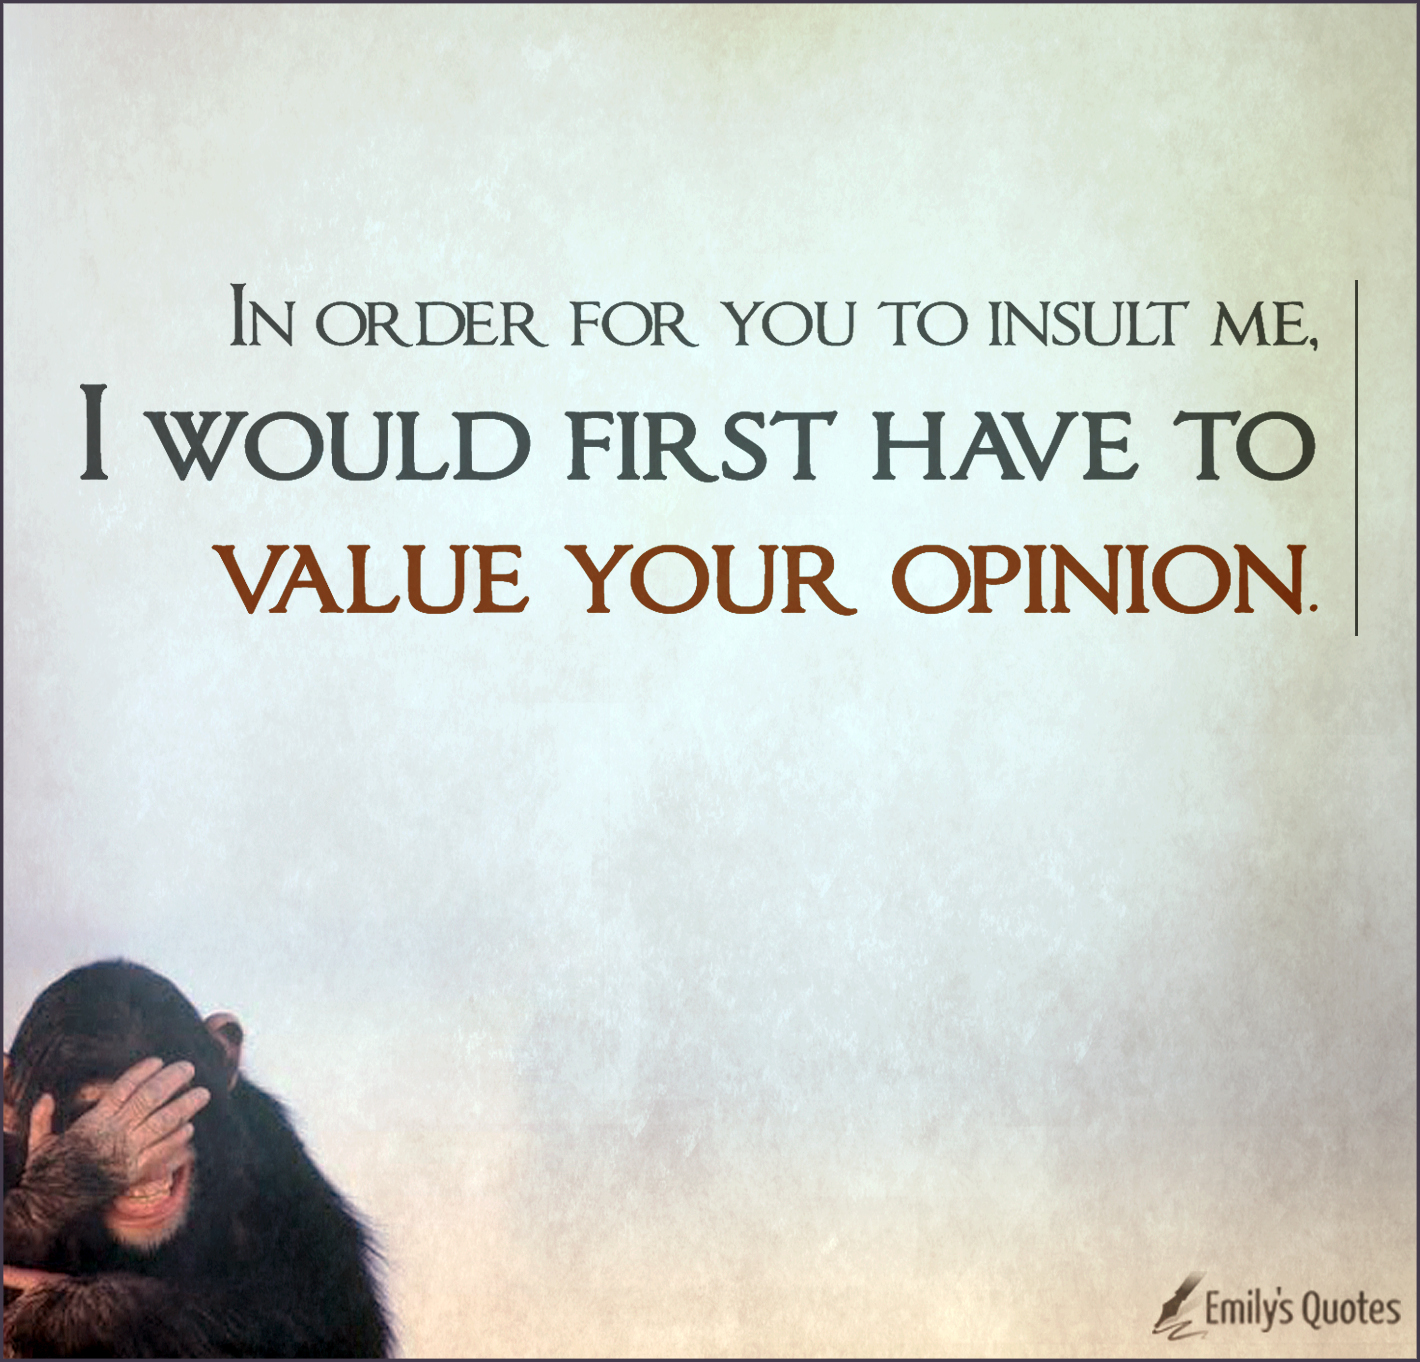 In order for you to insult me, I would first have to value your opinion